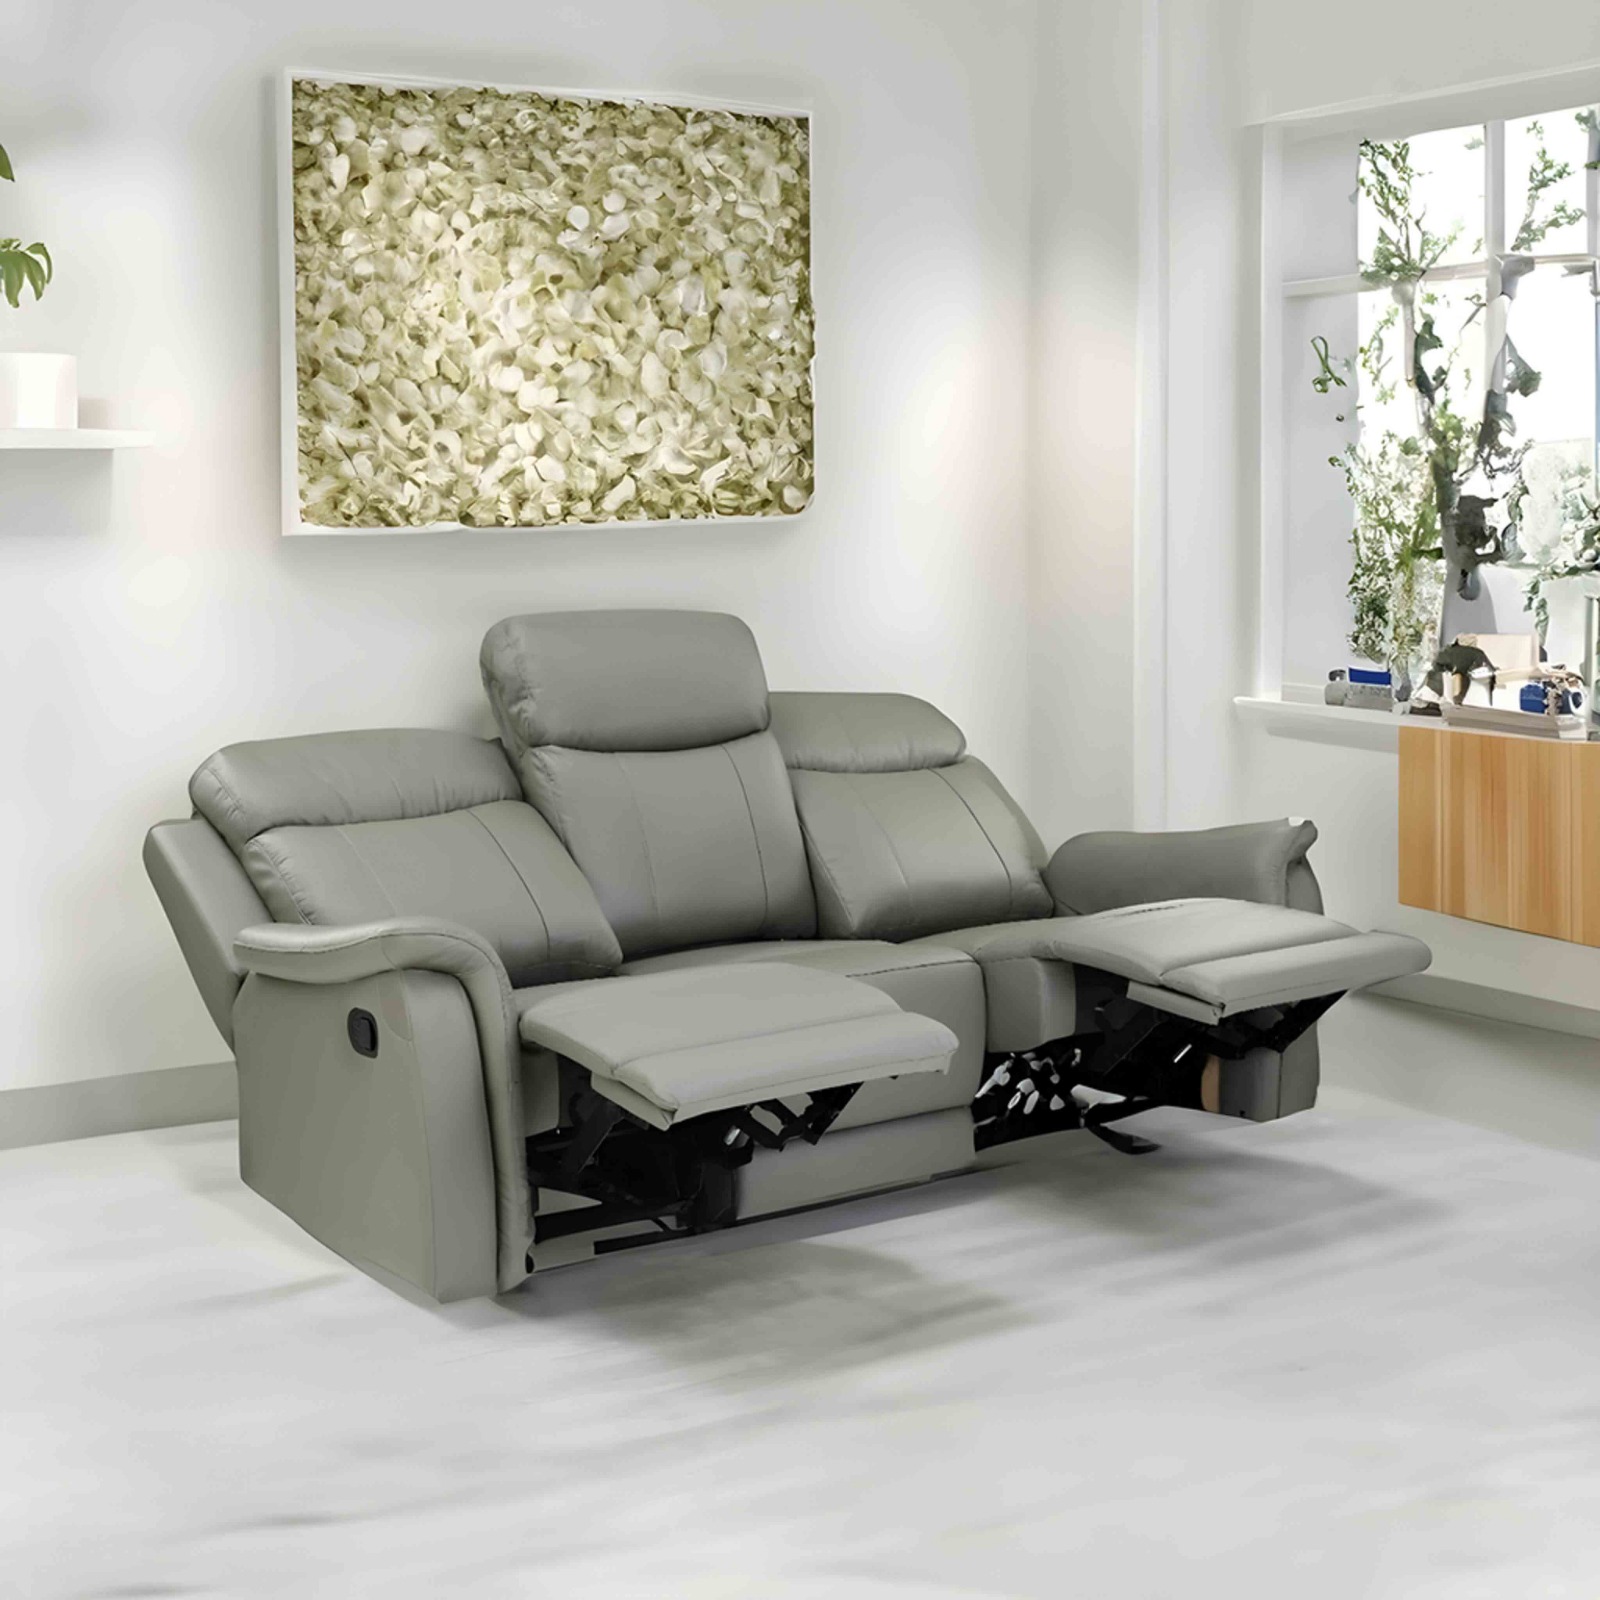 recliners, manual recliners, electric recliners, fabric recliners, leather recliners